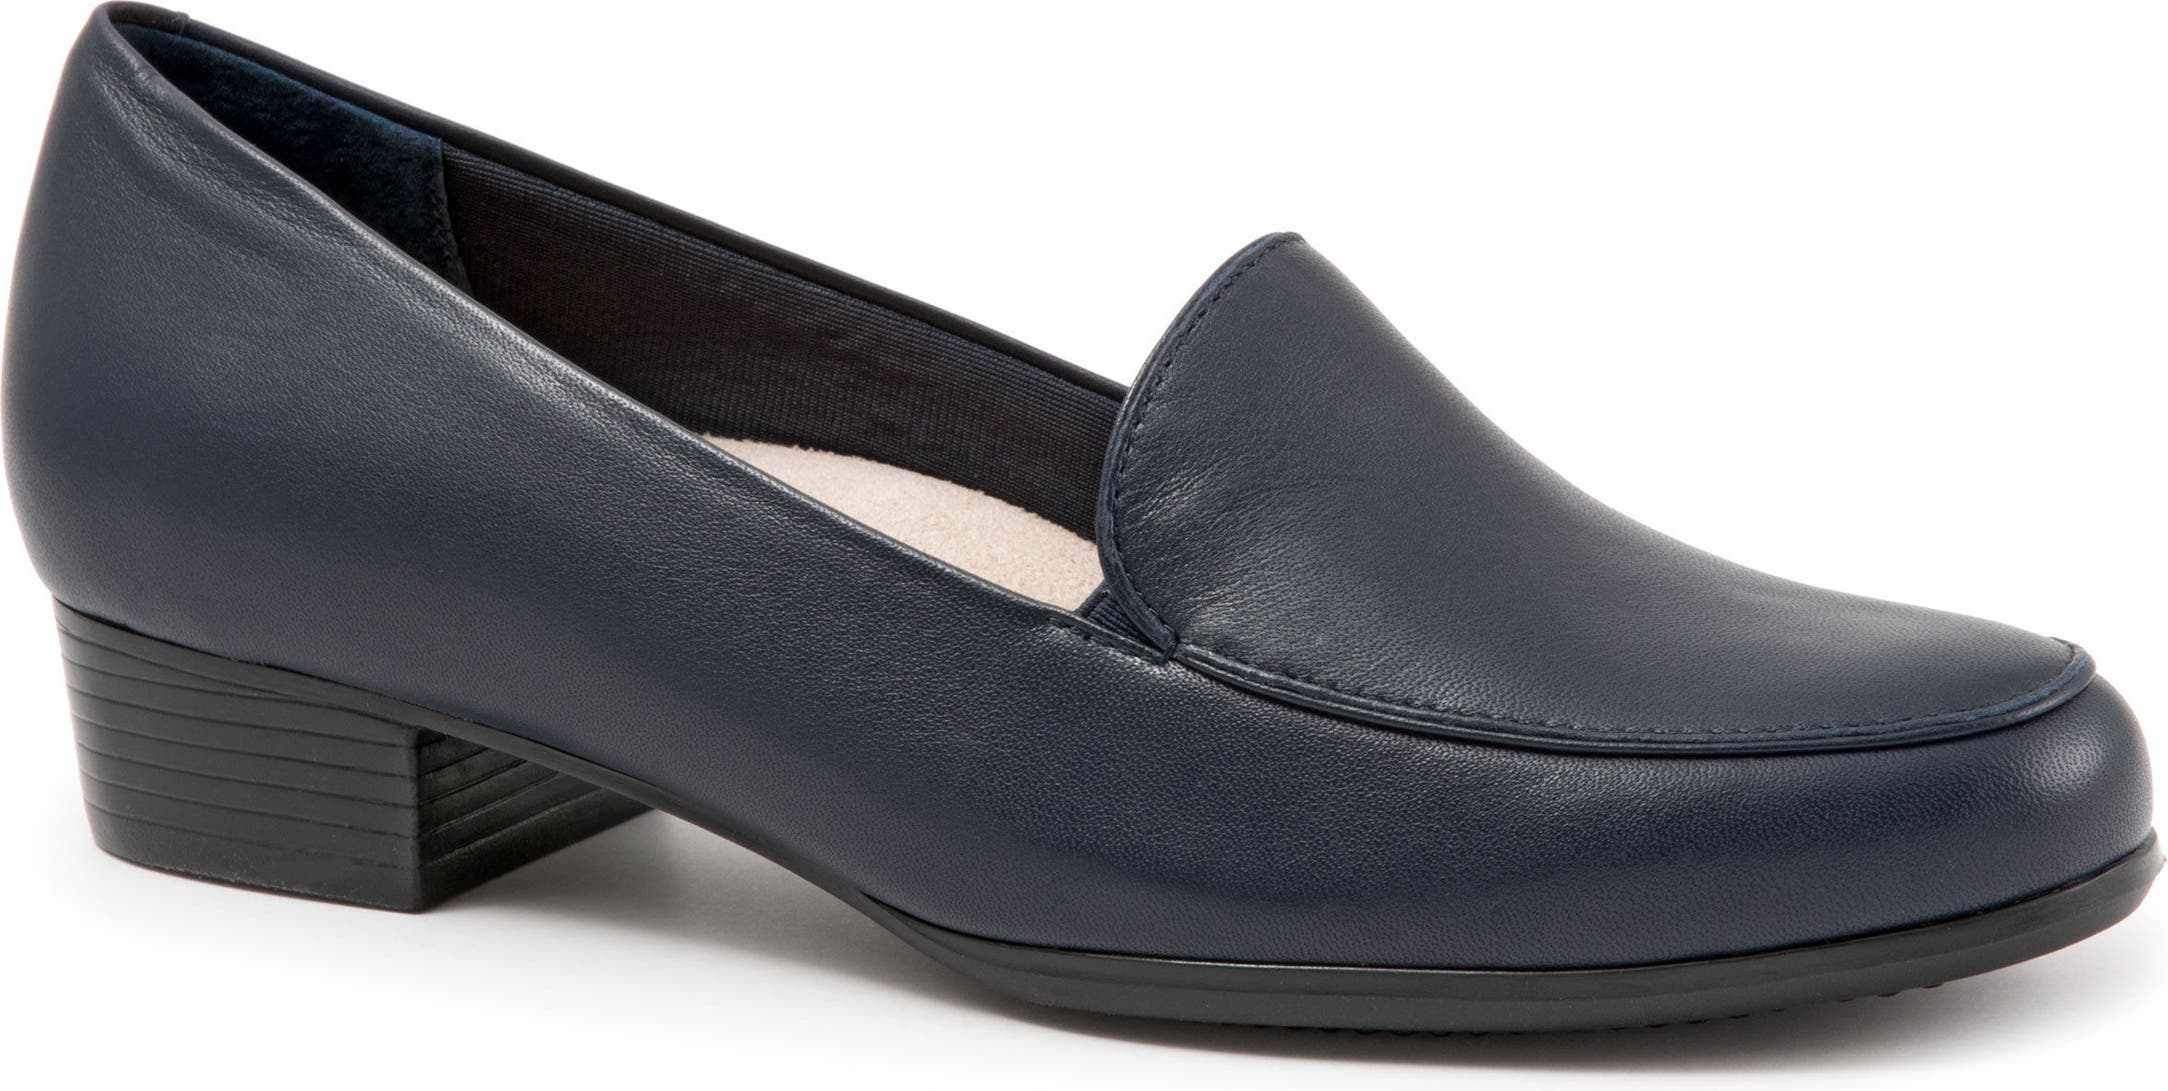 Trotters Womens Monarch Loafer 